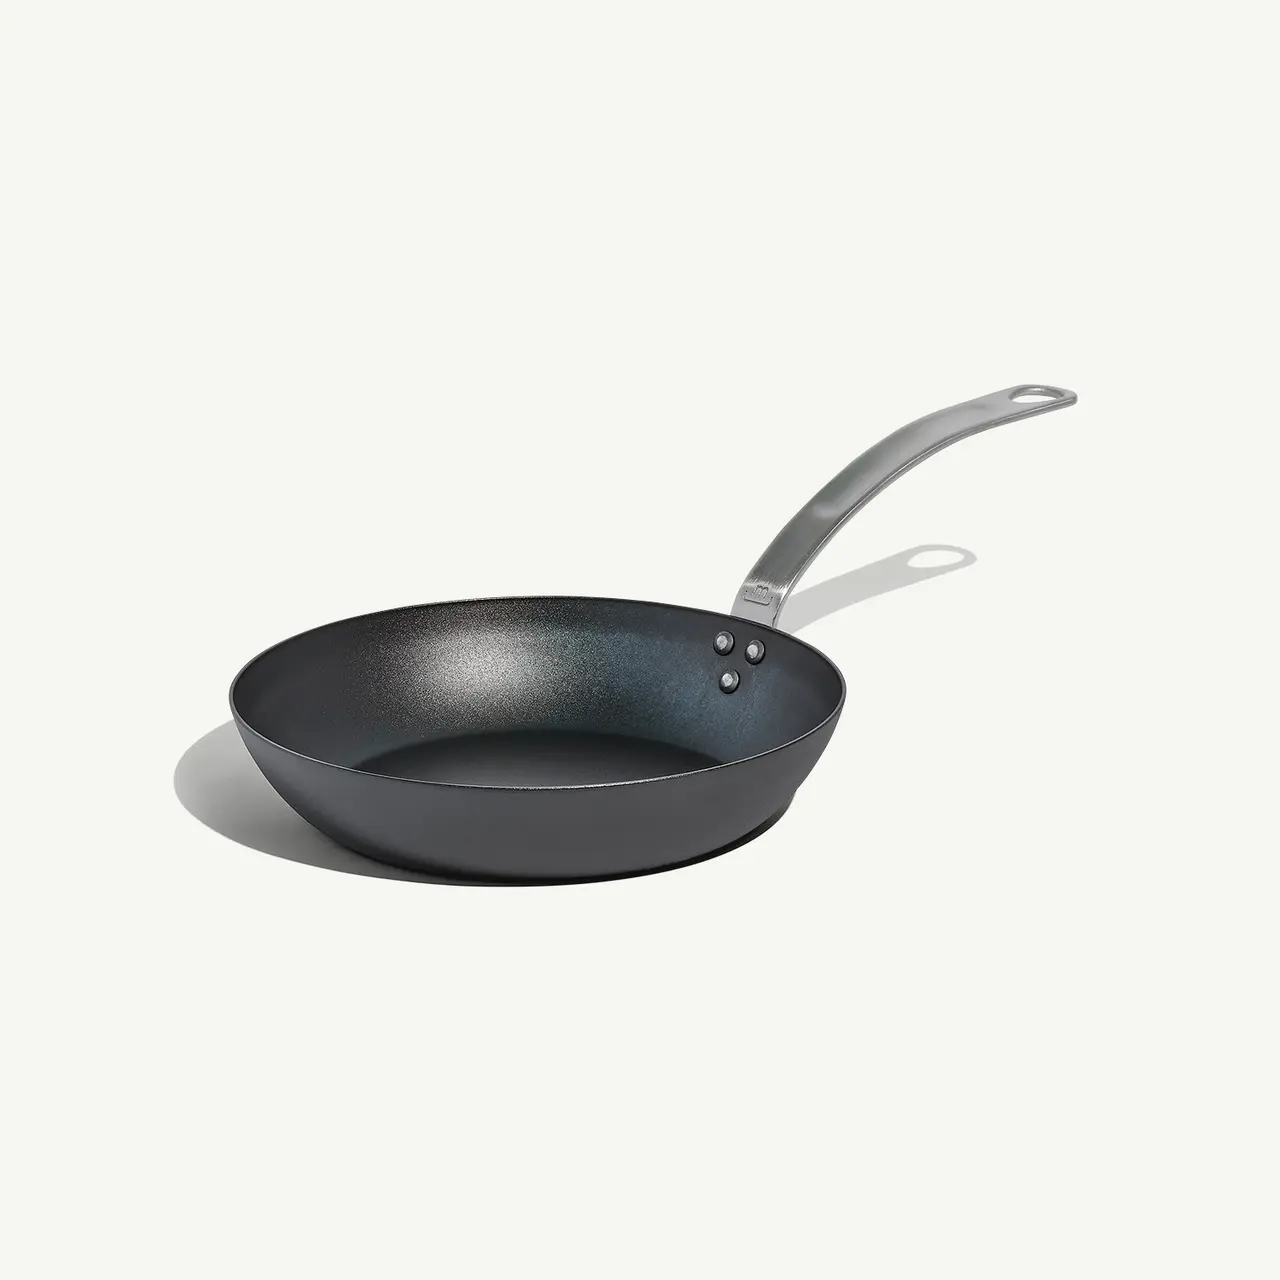 A non-stick frying pan with a stainless steel handle is showcased on a plain background.